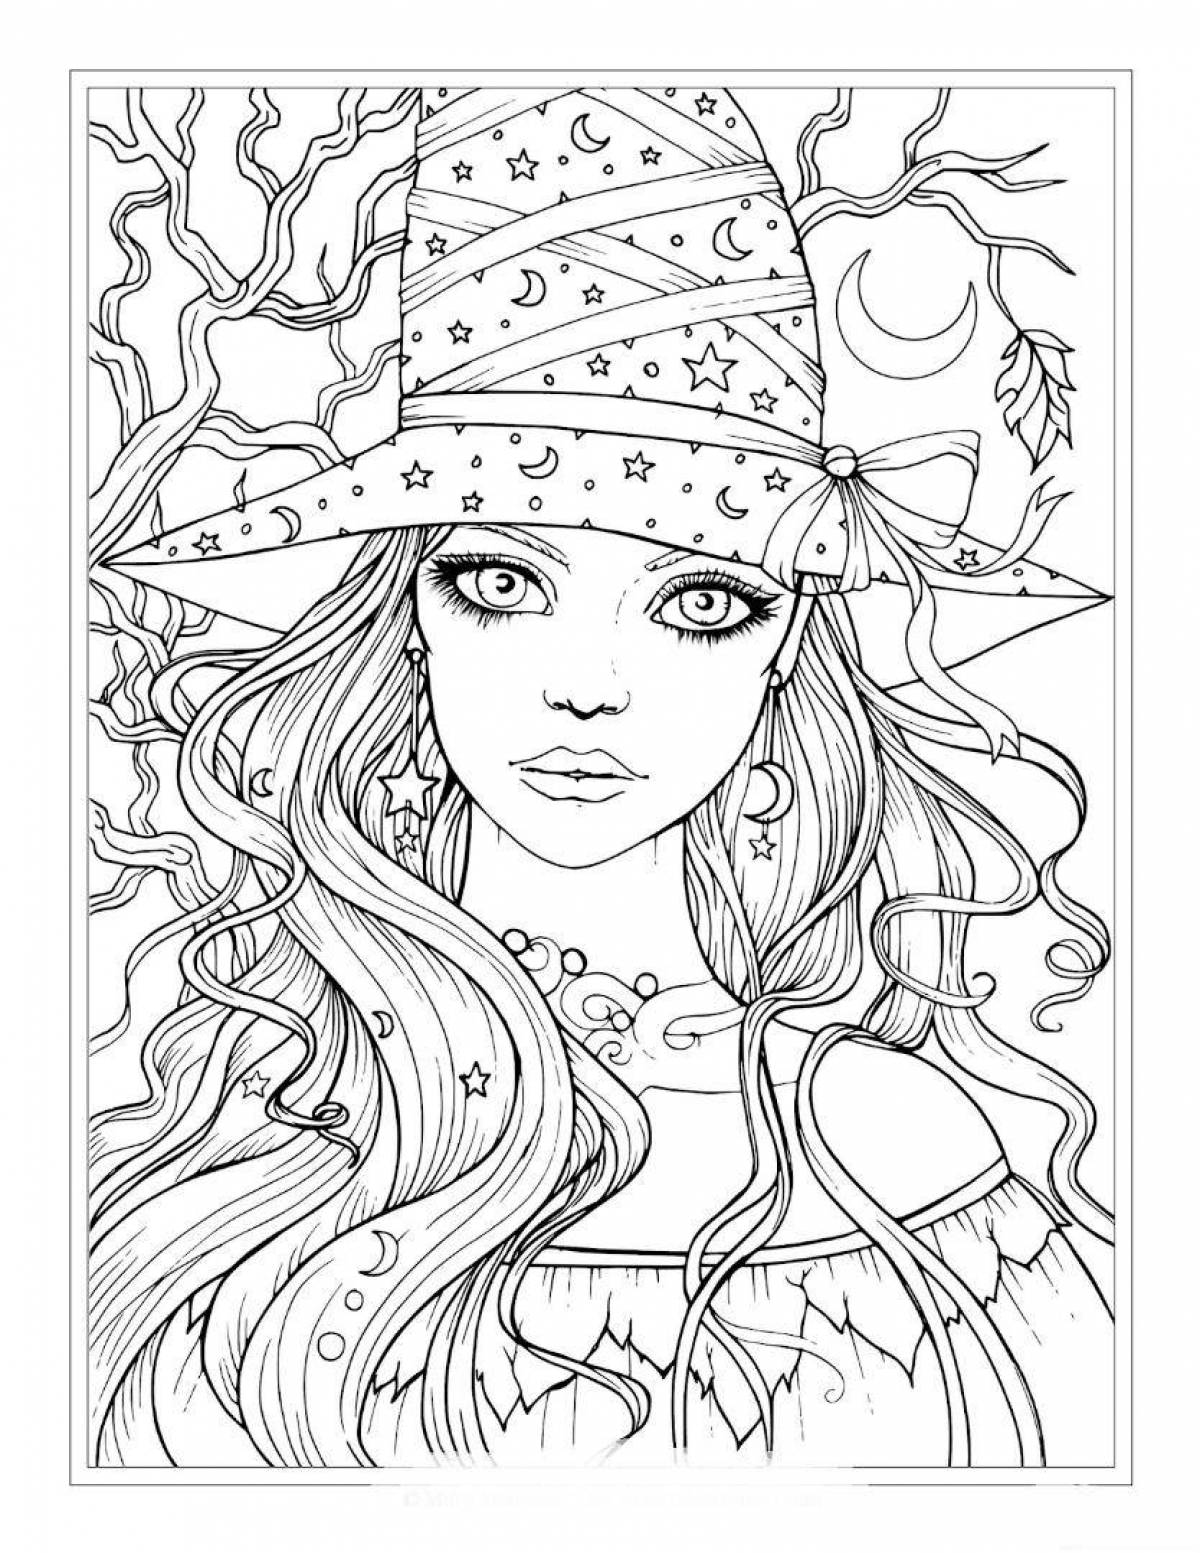 Amazing coloring book difficult people